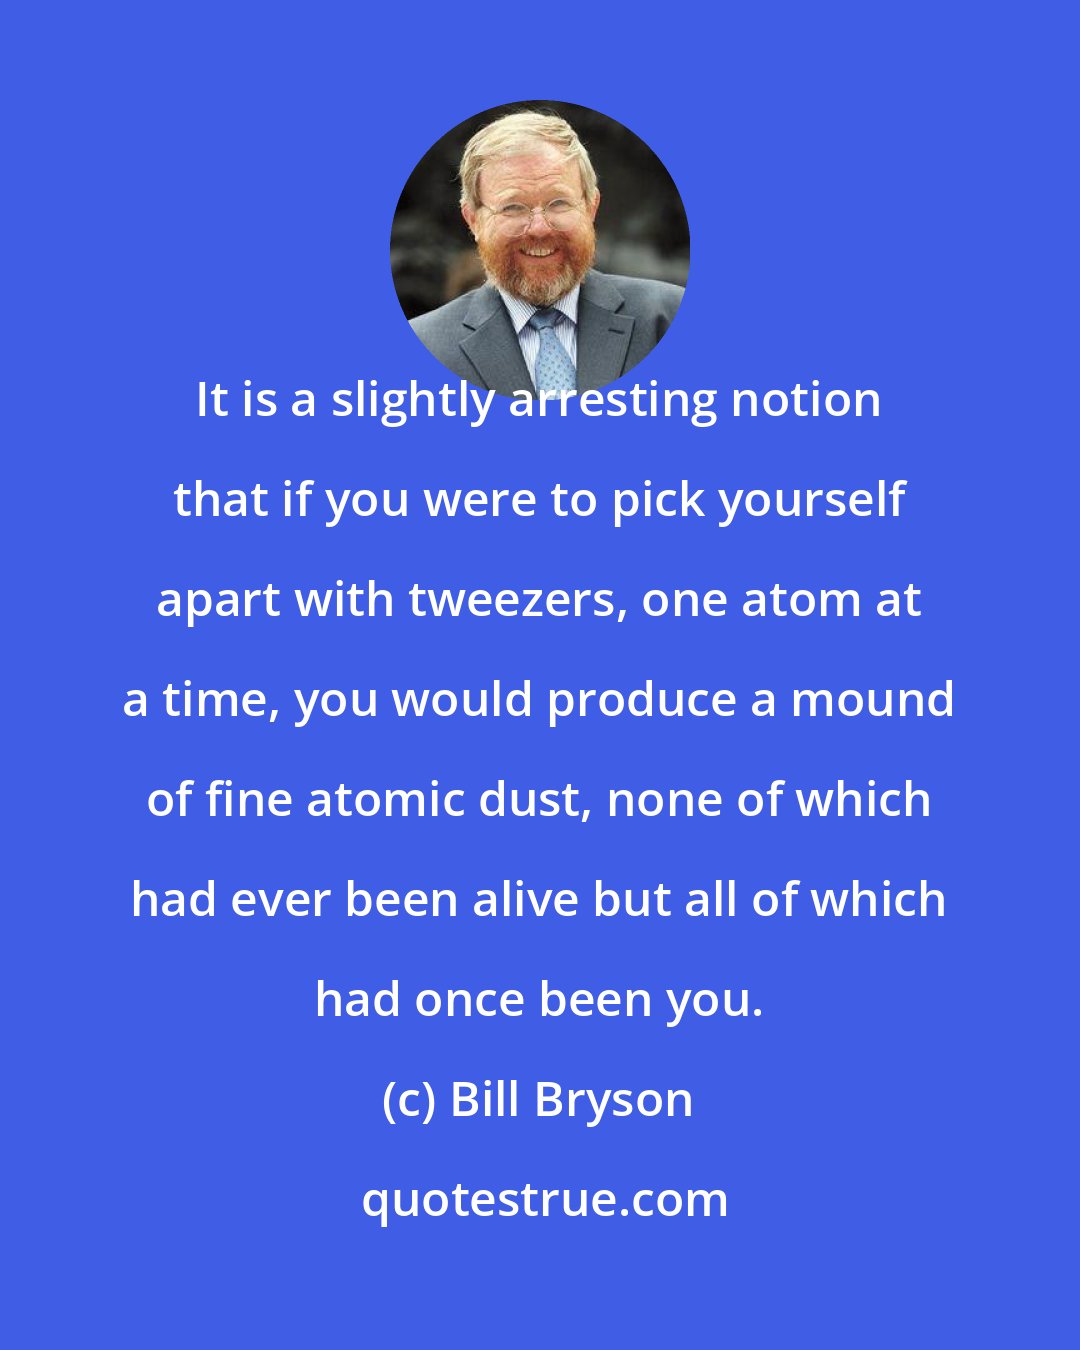 Bill Bryson: It is a slightly arresting notion that if you were to pick yourself apart with tweezers, one atom at a time, you would produce a mound of fine atomic dust, none of which had ever been alive but all of which had once been you.